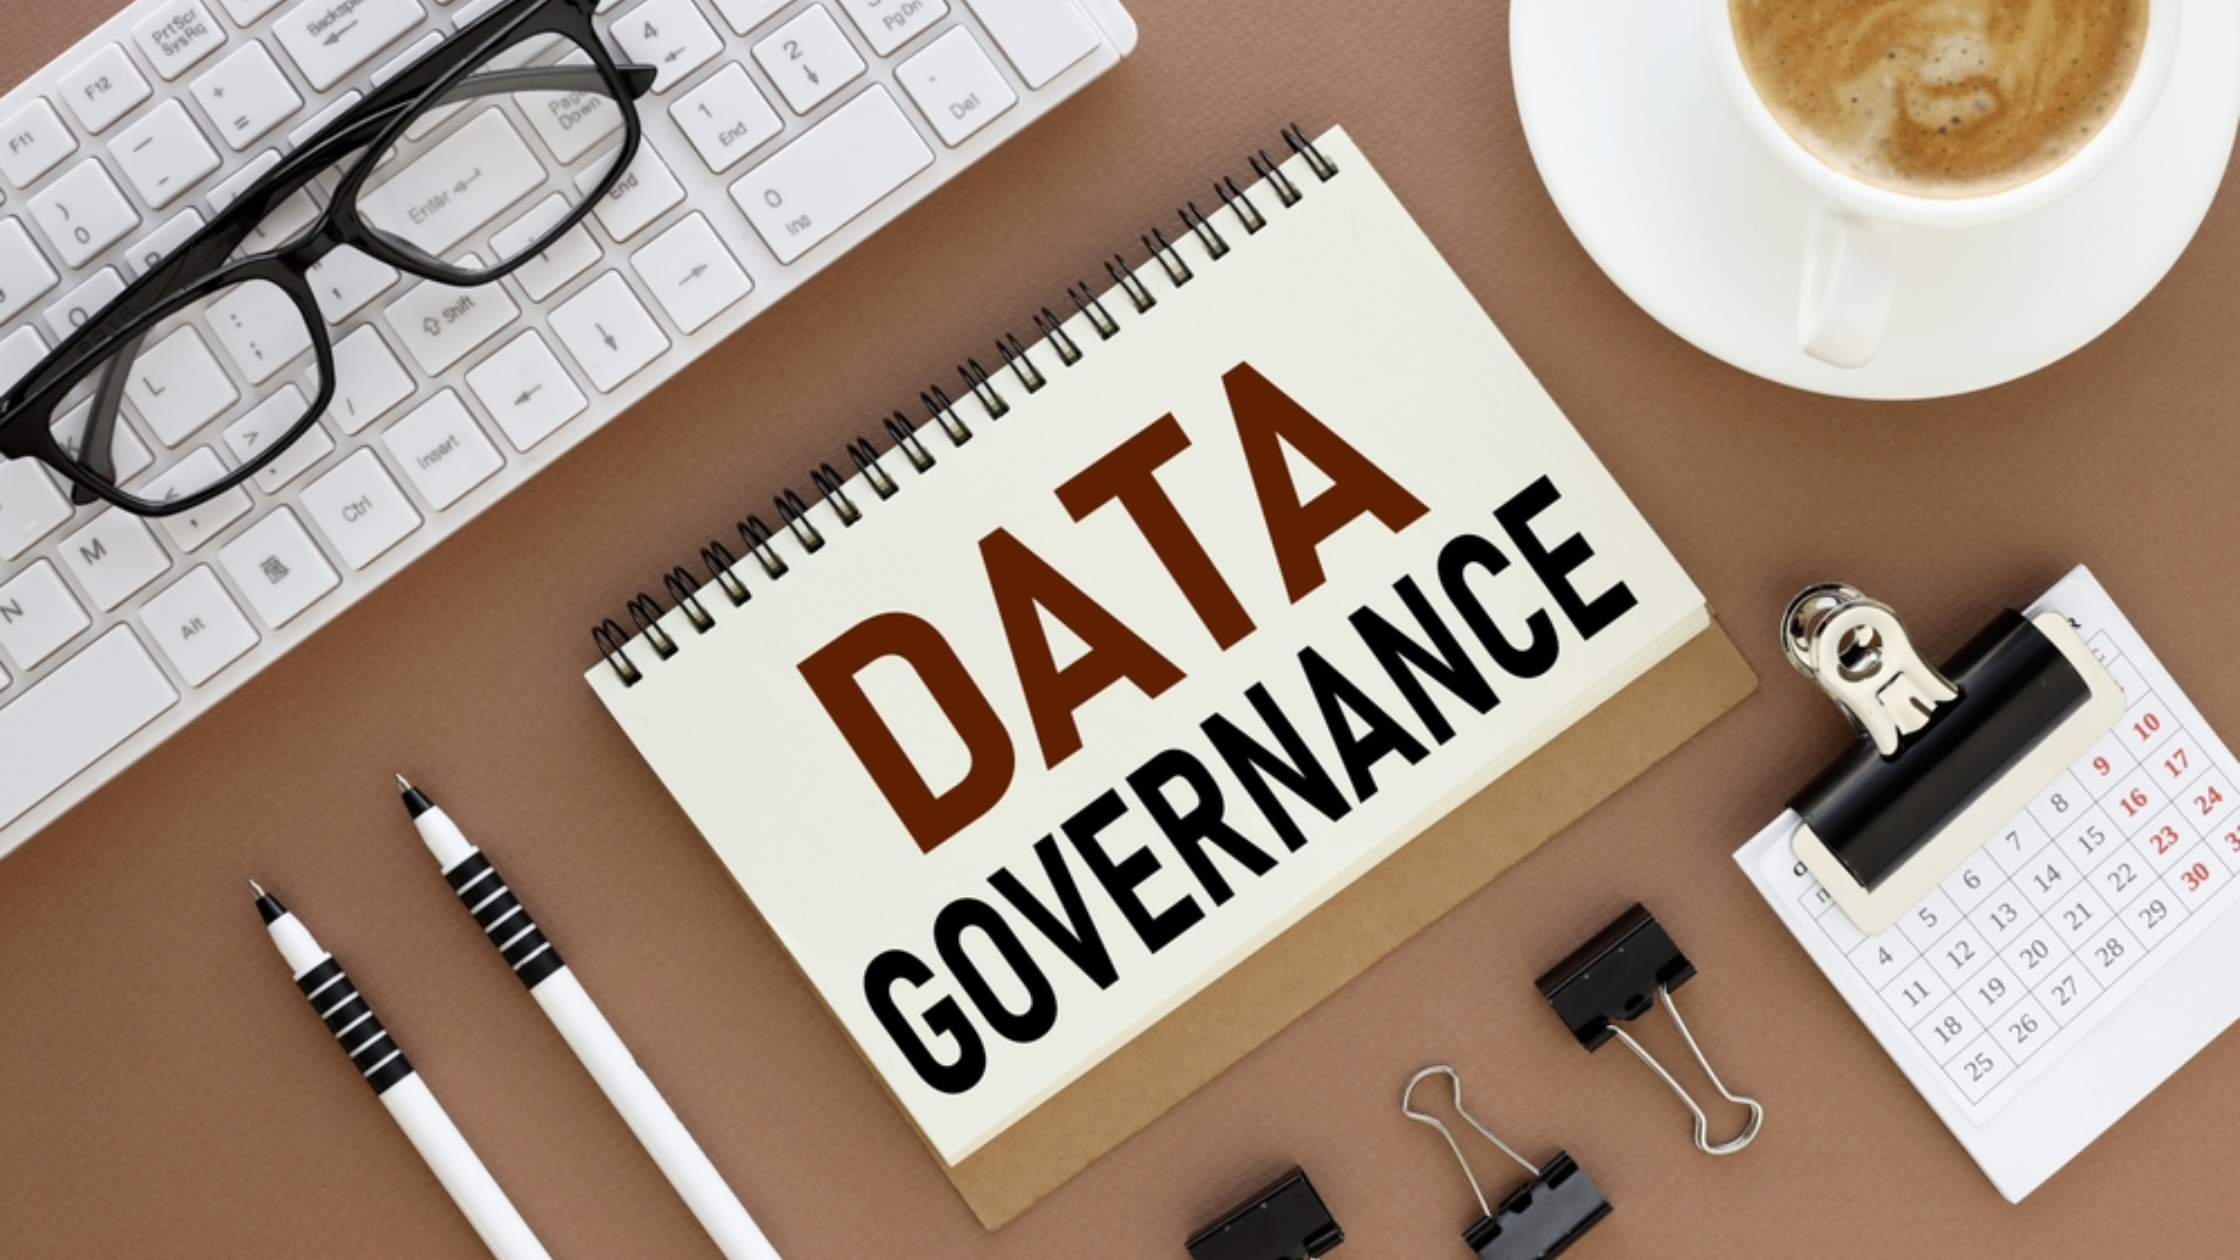 Master Data Governance in Banking: Benefits, Implementation, Challenges, and Proven Practices